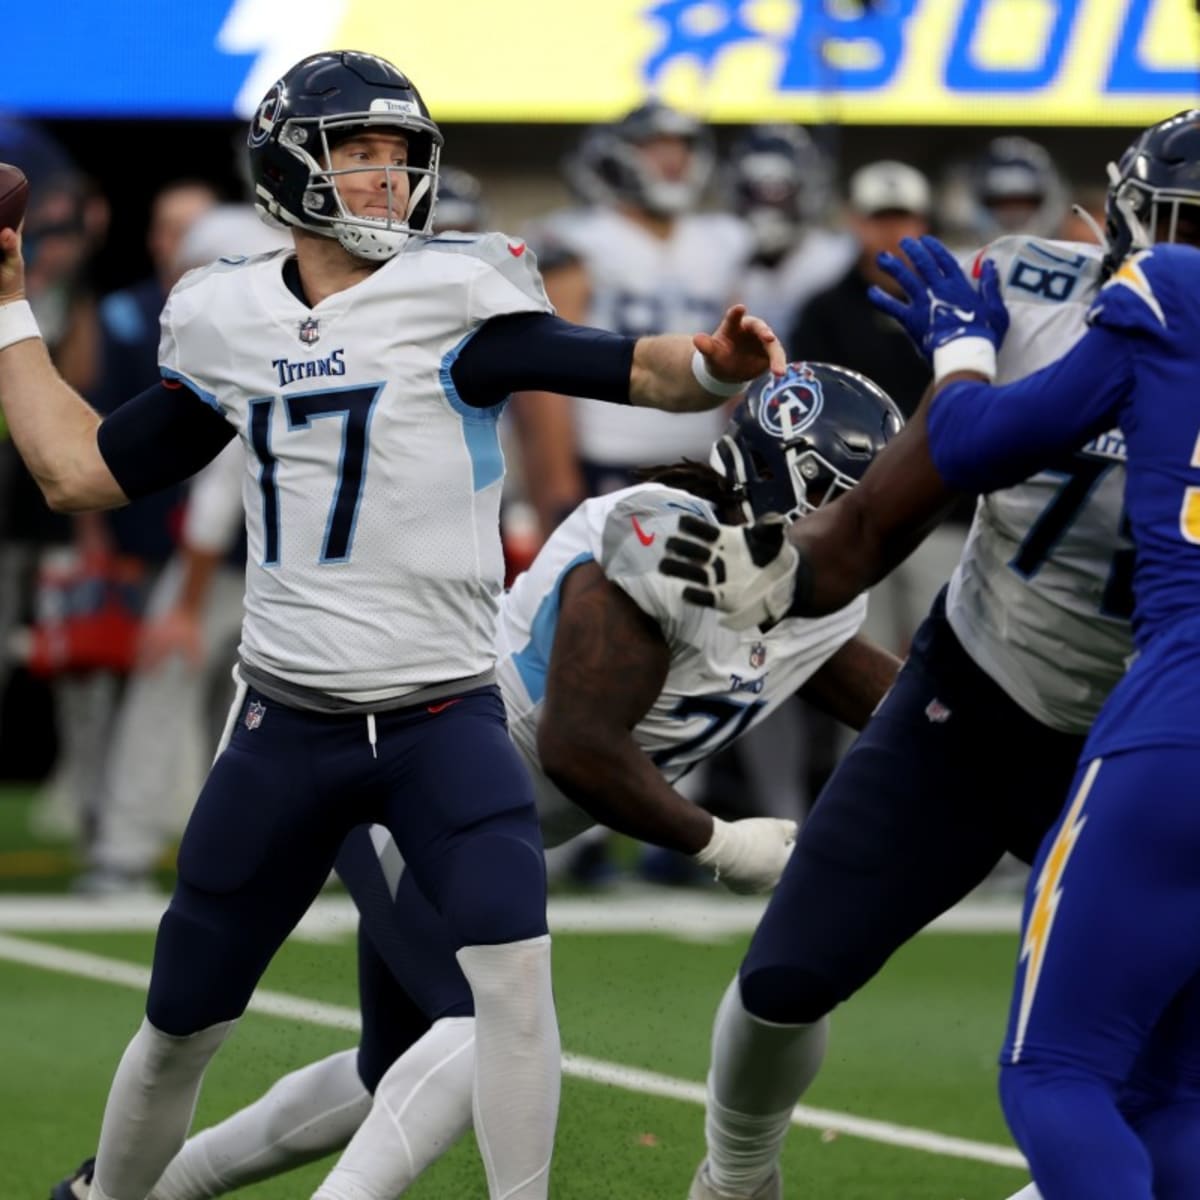 2023 NFL Draft Rumors: Eagles, Titans, Lions Linked to Possible